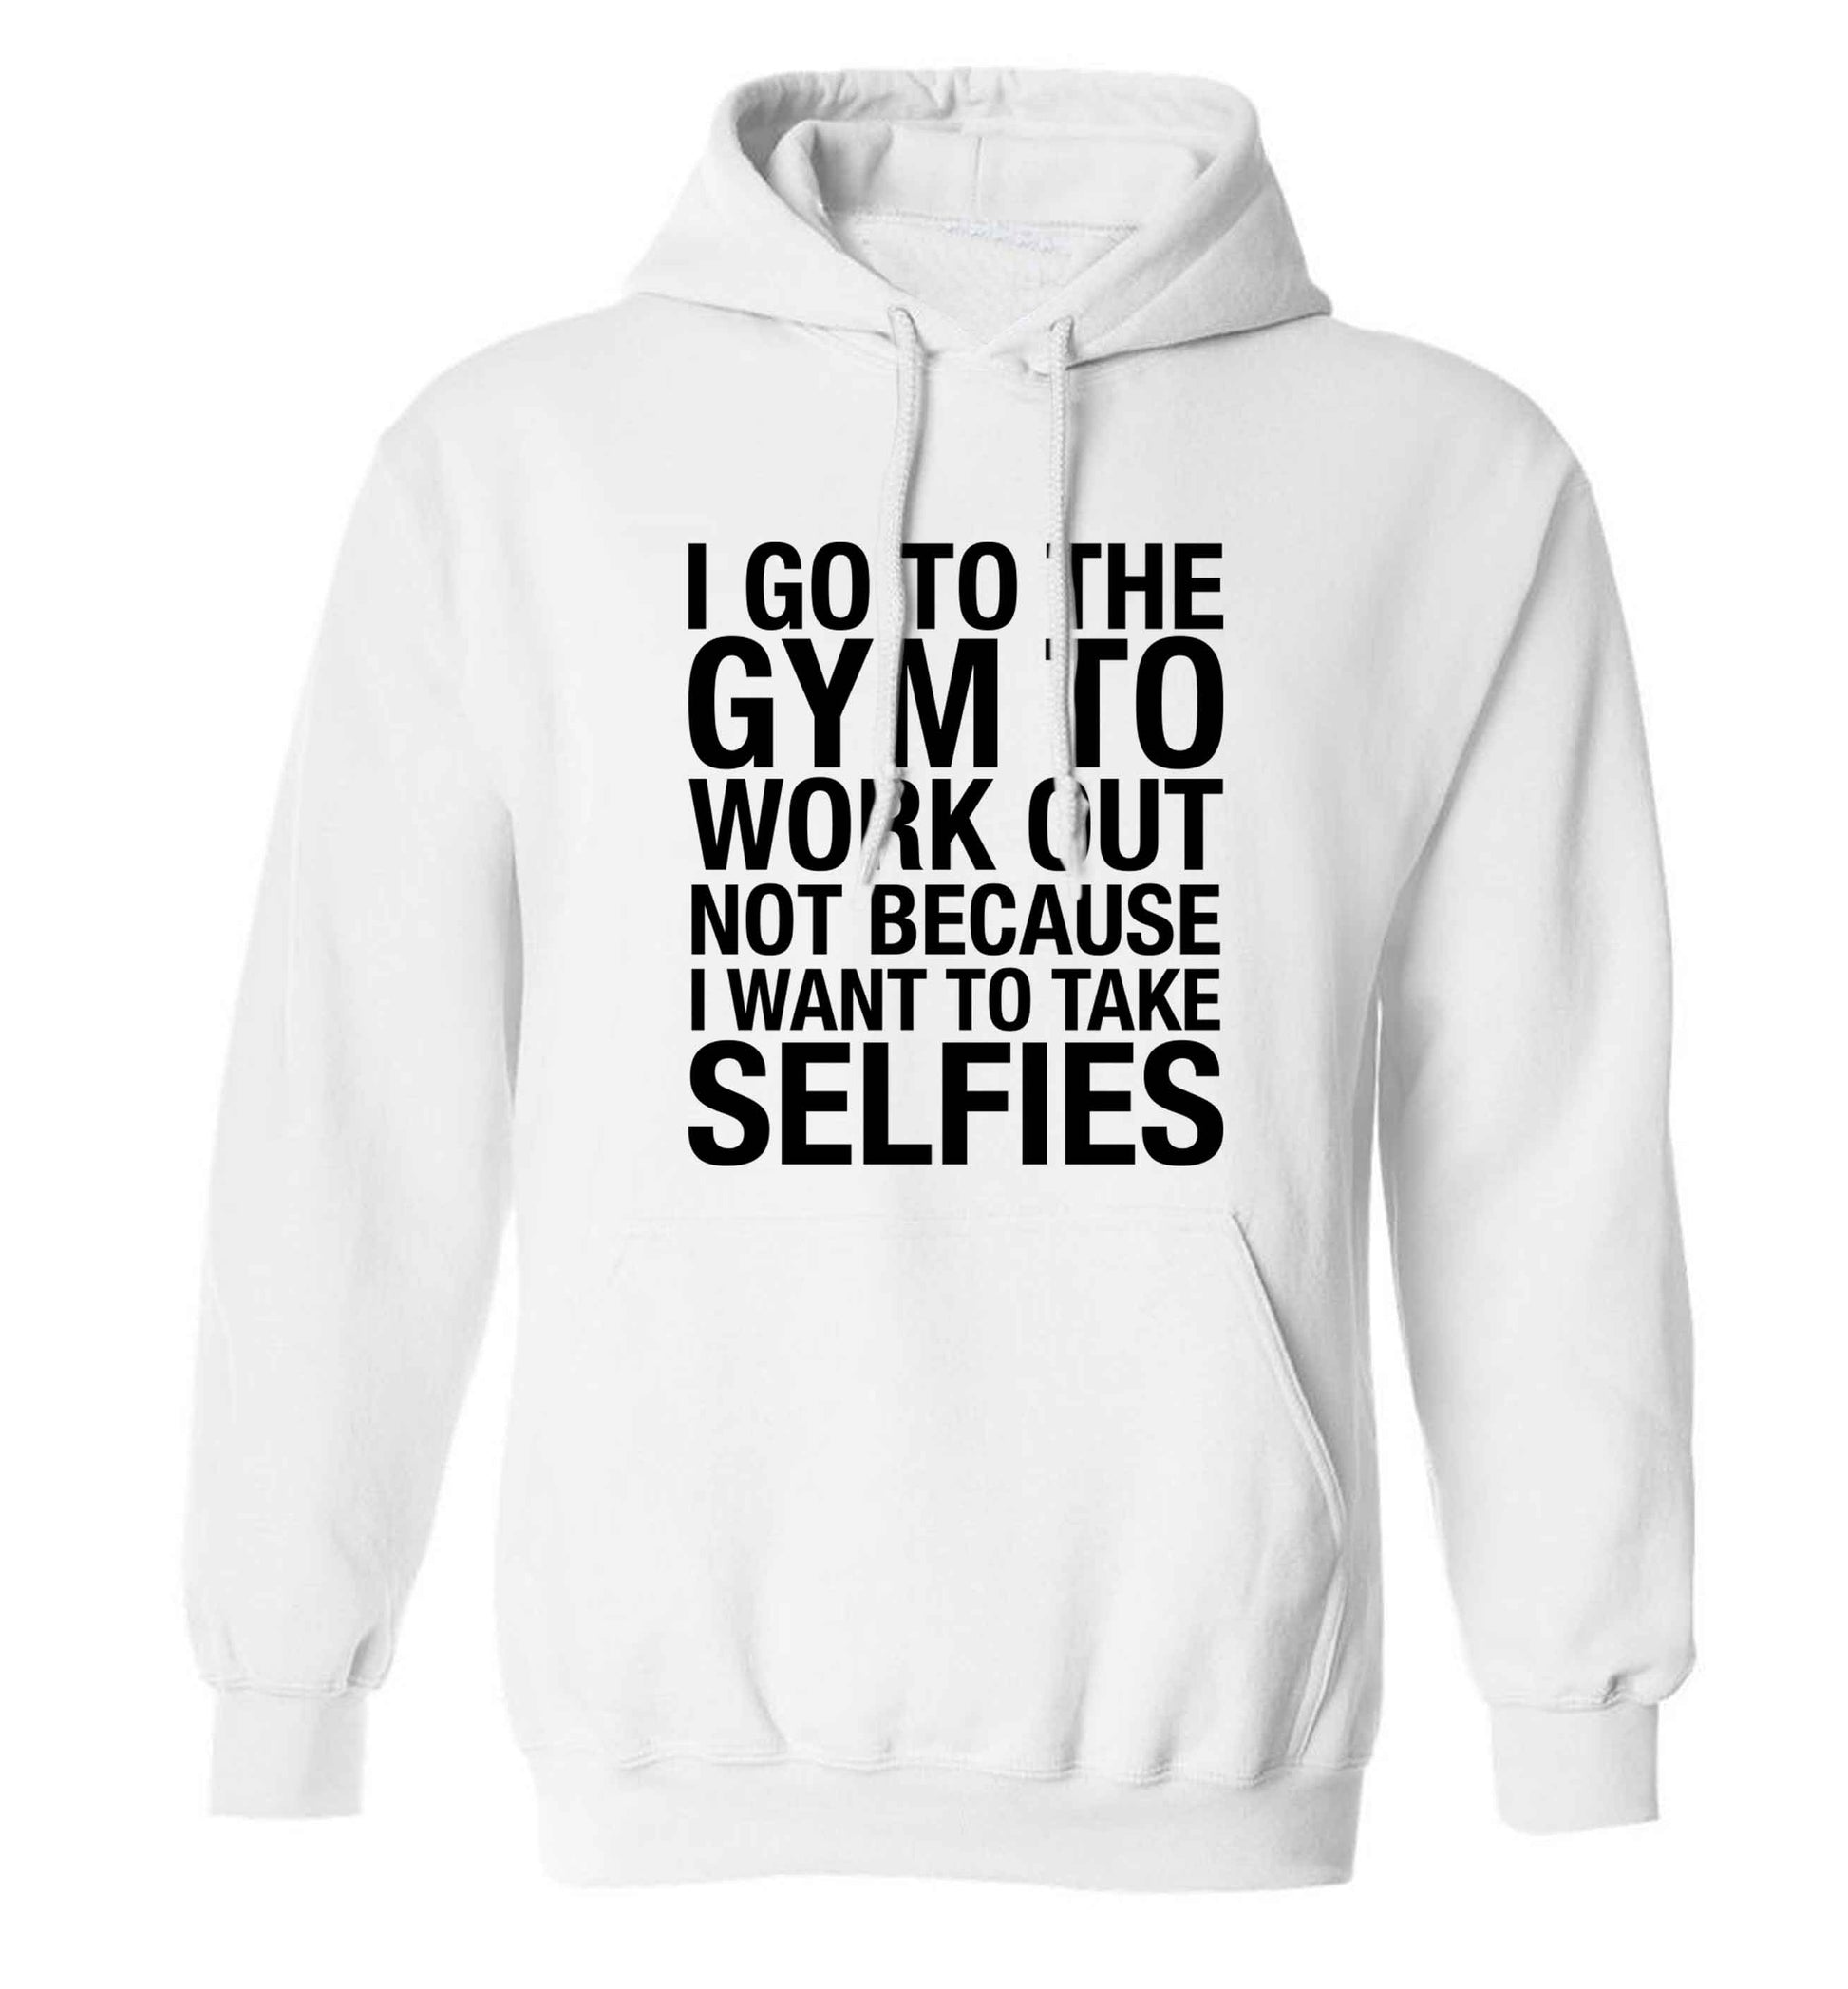 I go to the gym to workout not to take selfies adults unisex white hoodie 2XL